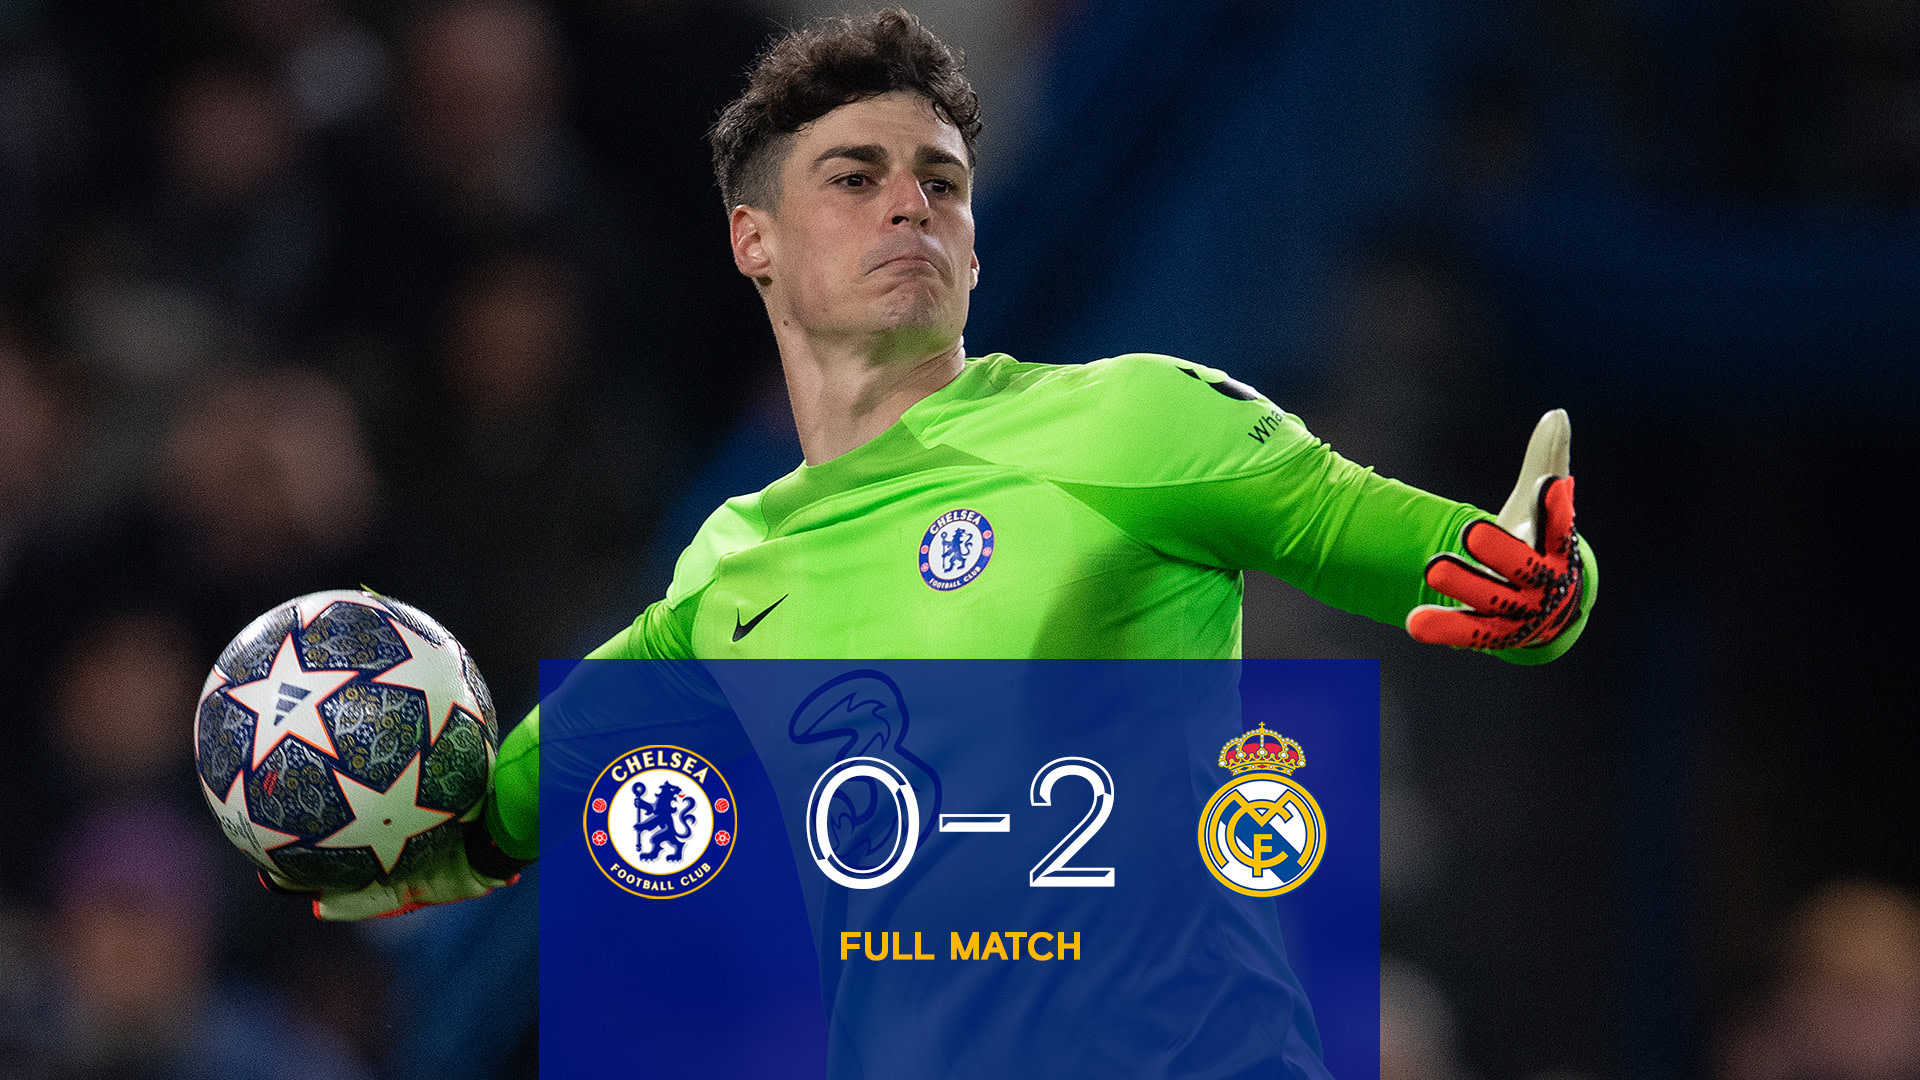 Full Match Chelsea 0-2 Real Madrid Video Official Site Chelsea Football Club